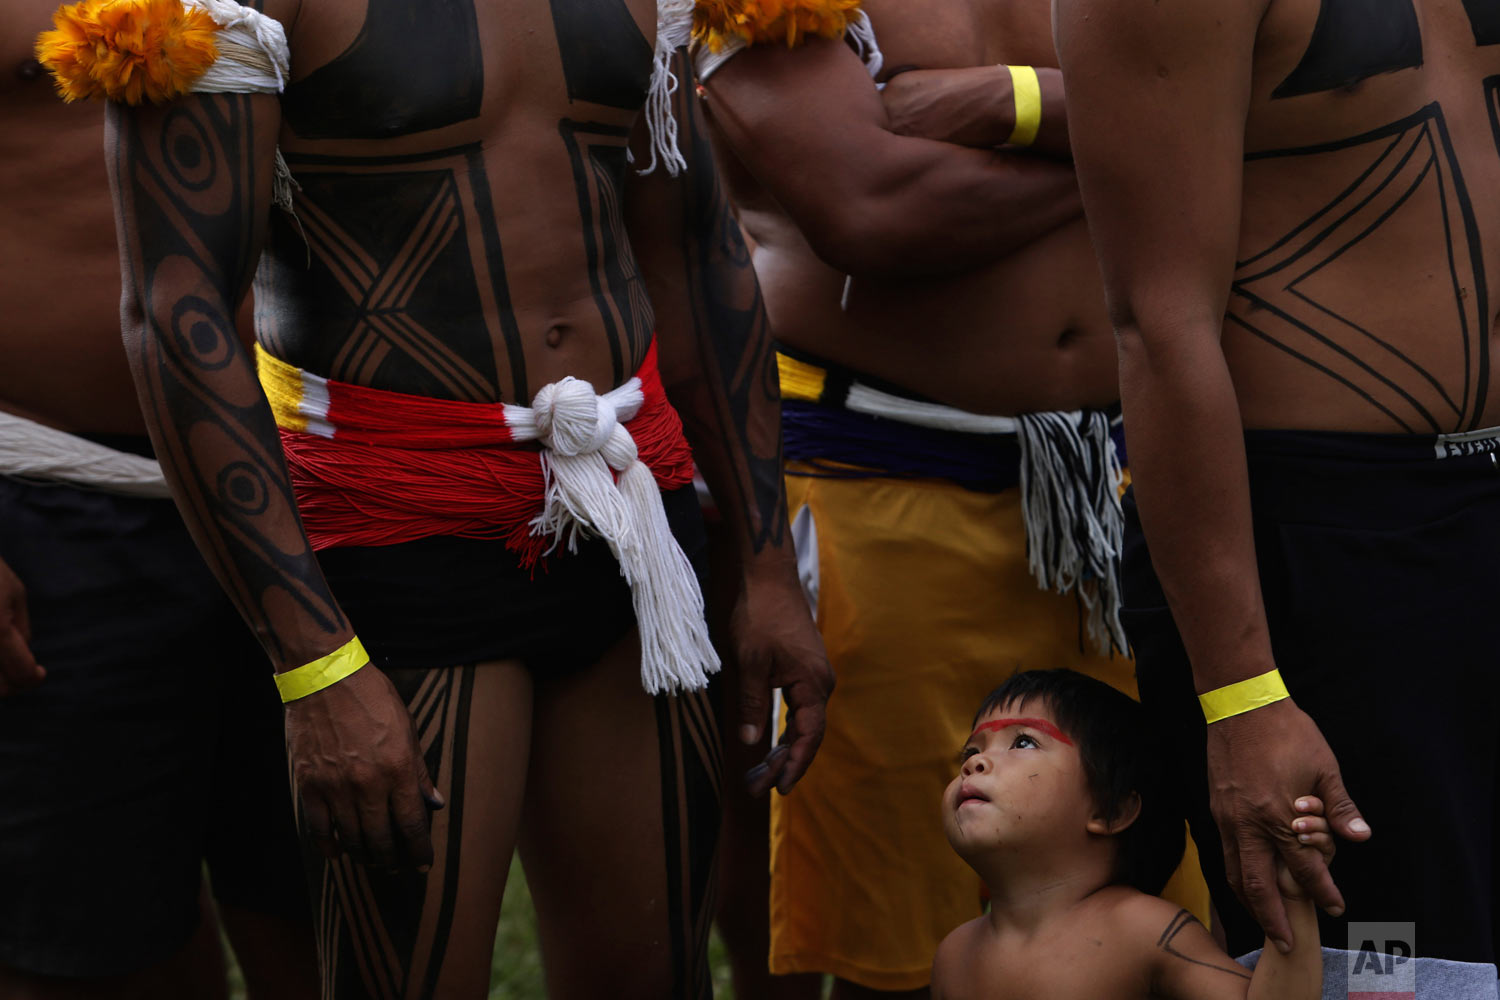  A Kuikuro indigenous toddler looks up at the adults inside a camp coined "Free Land," at the start of an annual gathering by Brazil's indigenous peoples in Brasilia, Brazil, Monday, April 23, 2018. Hundreds of indigenous Brazilians are setting up ca